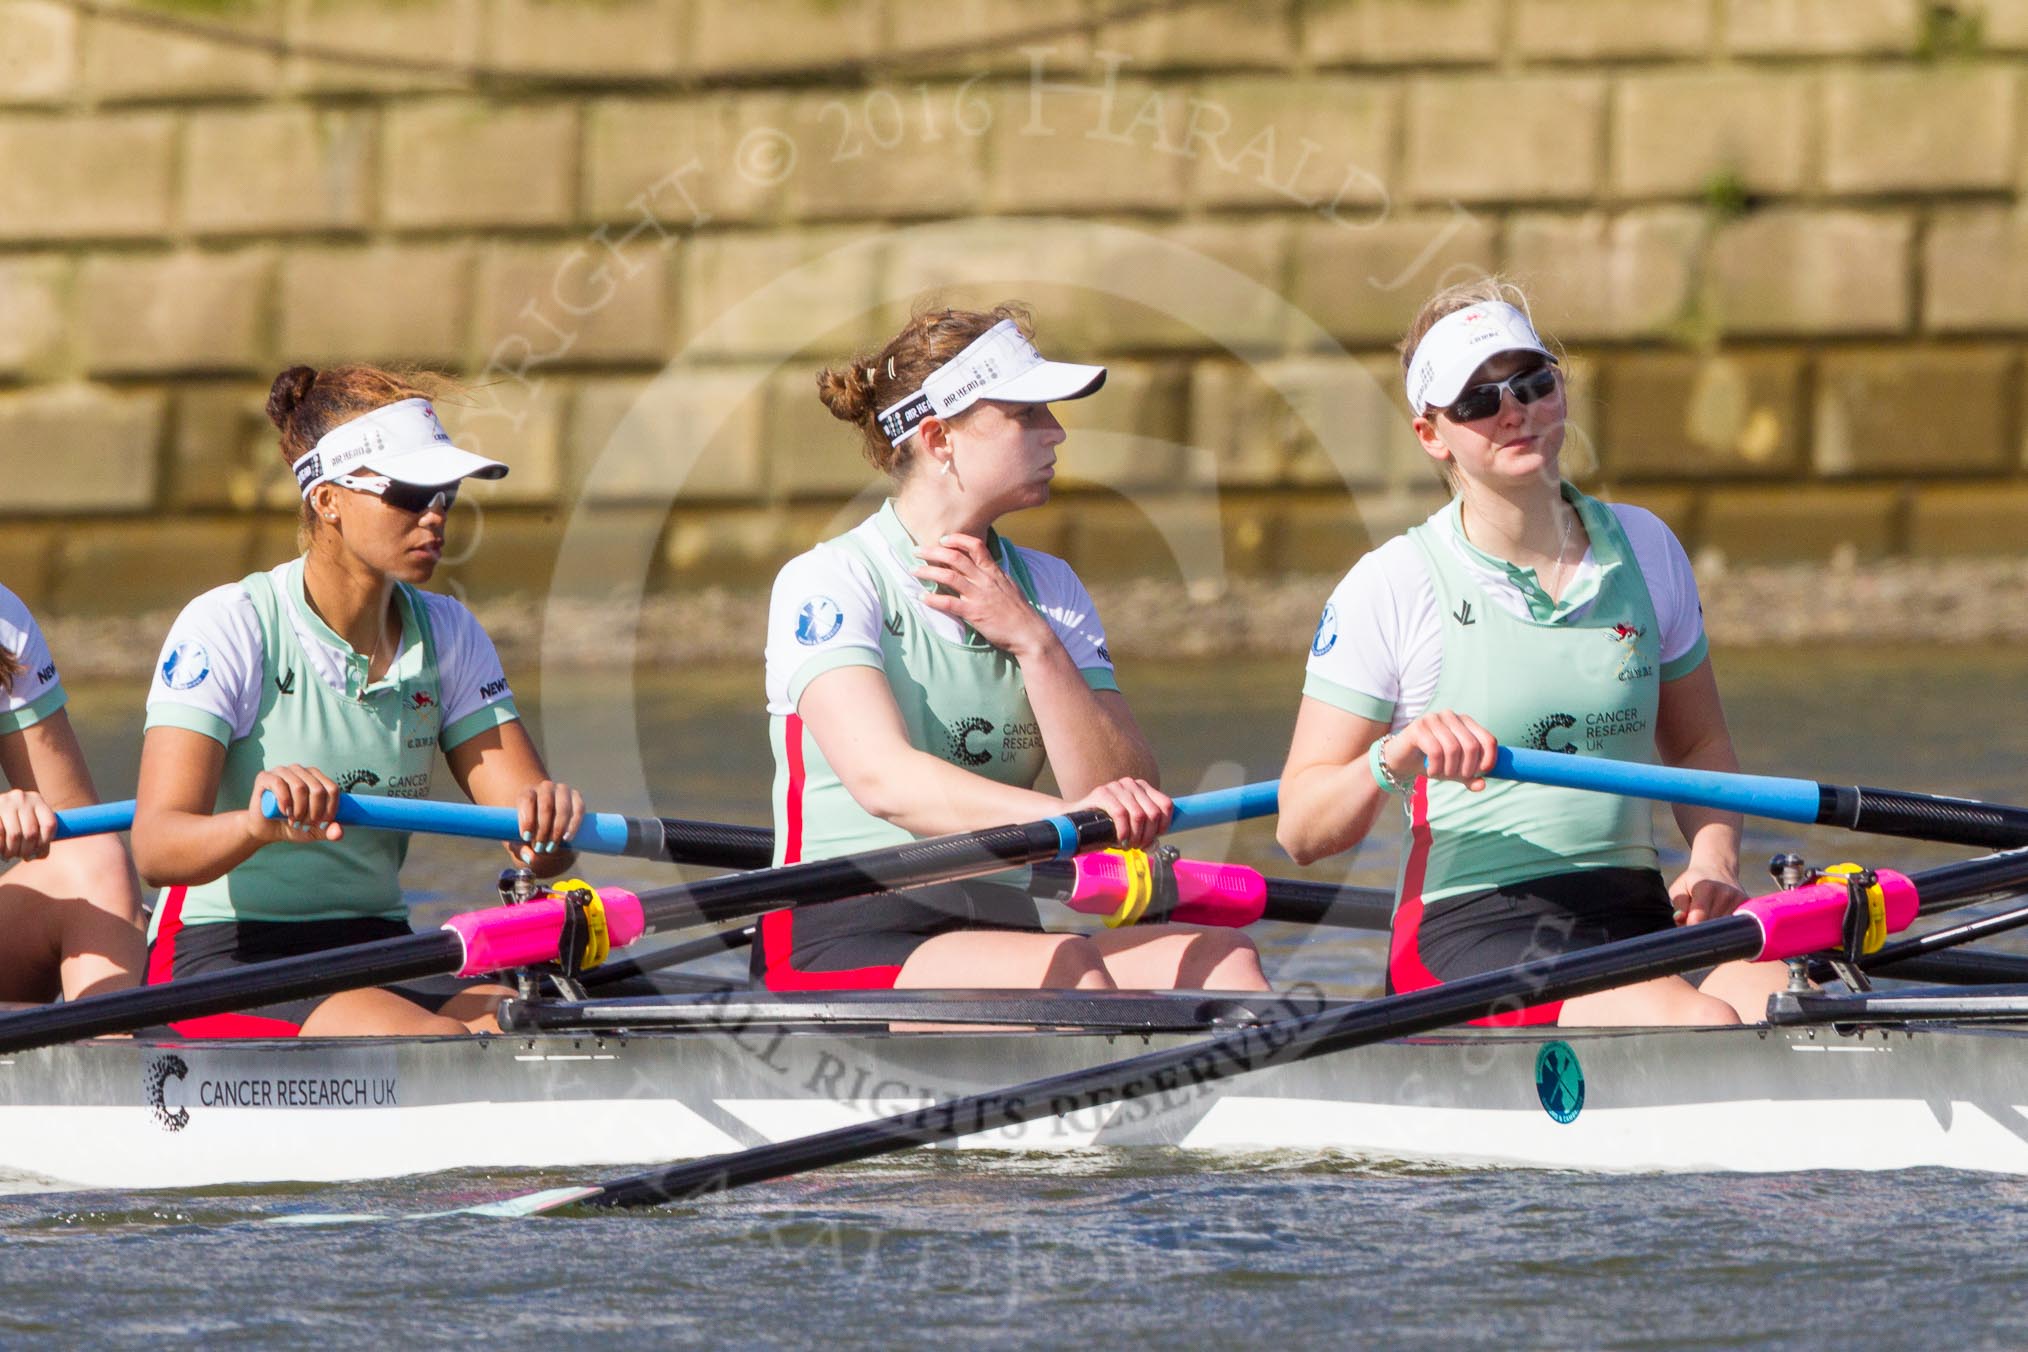 The Boat Race season 2016 -  The Cancer Research Women's Boat Race.
River Thames between Putney Bridge and Mortlake,
London SW15,

United Kingdom,
on 27 March 2016 at 14:06, image #154